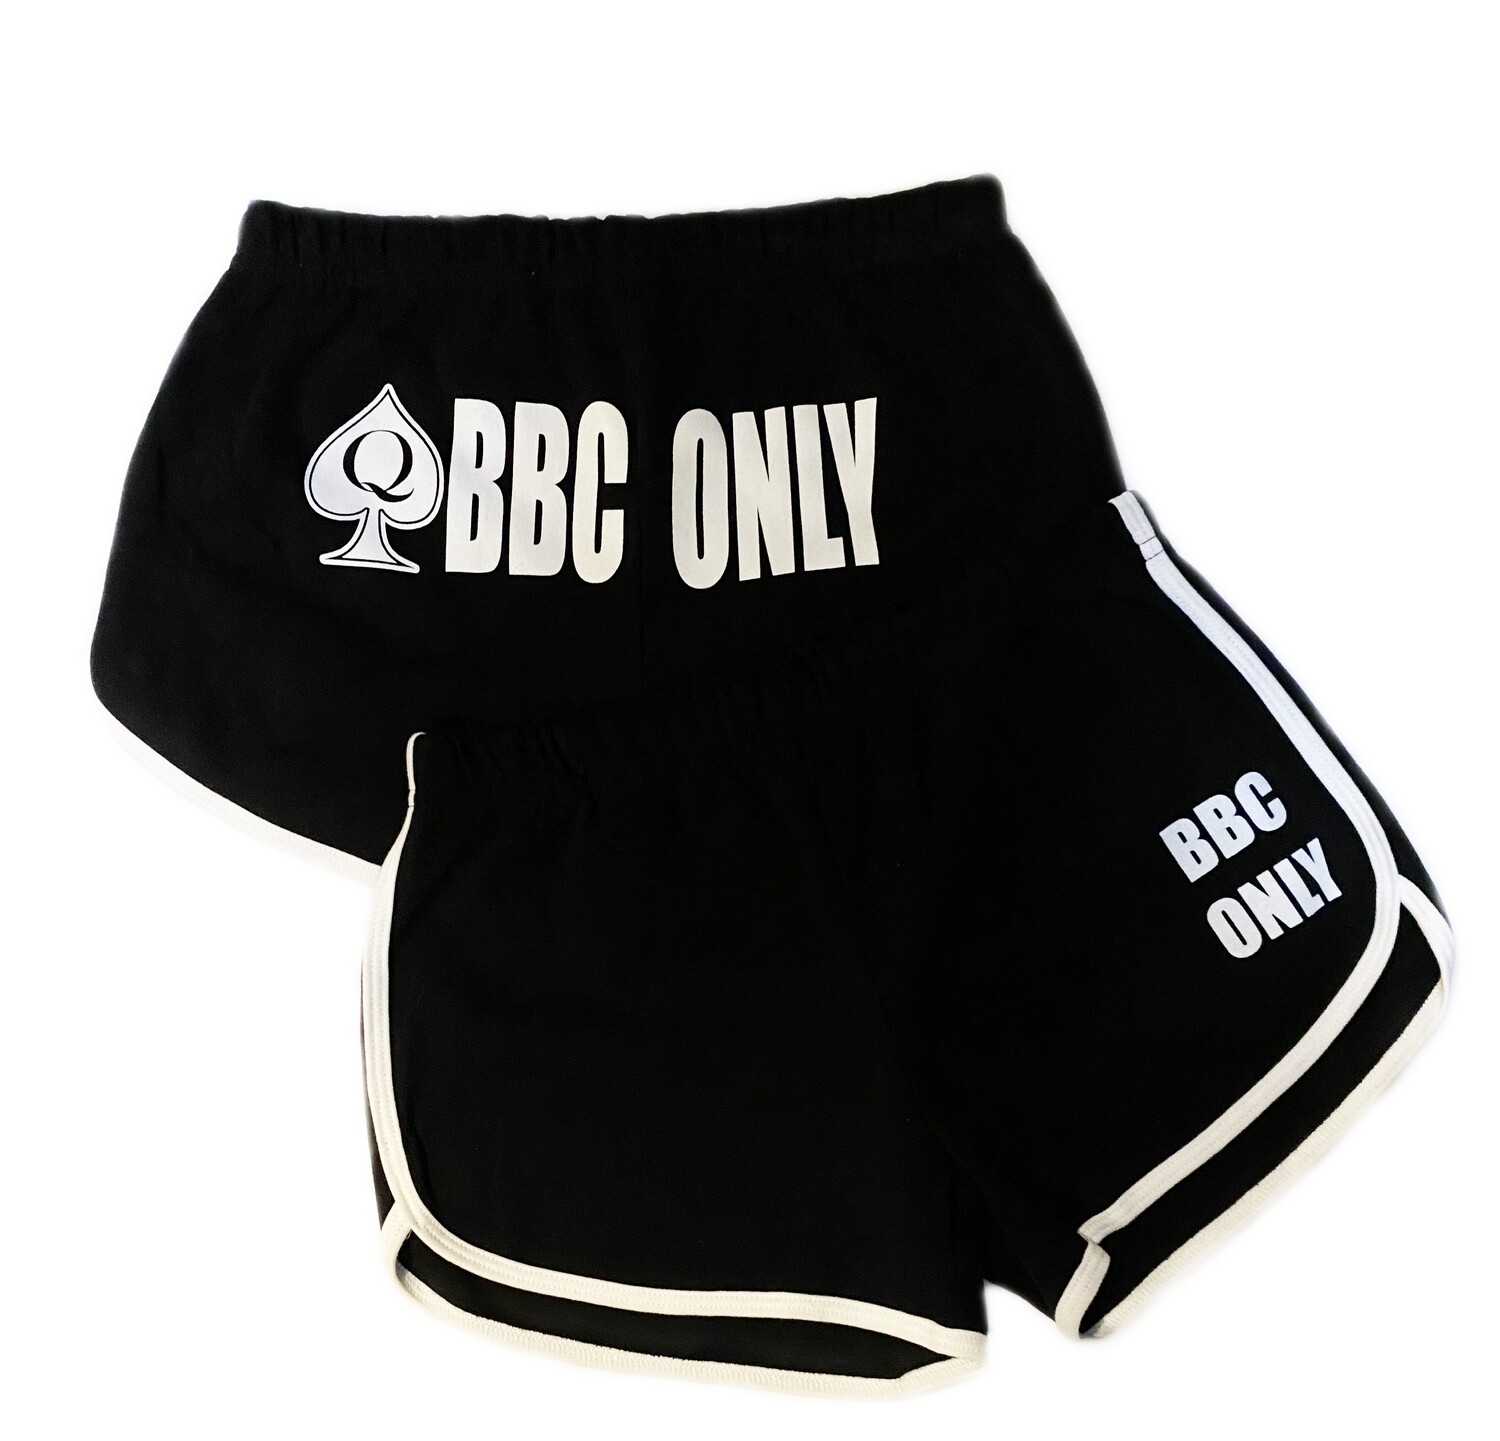 BBC Only QoS Short Set - Shorts Only for Queen of Spades